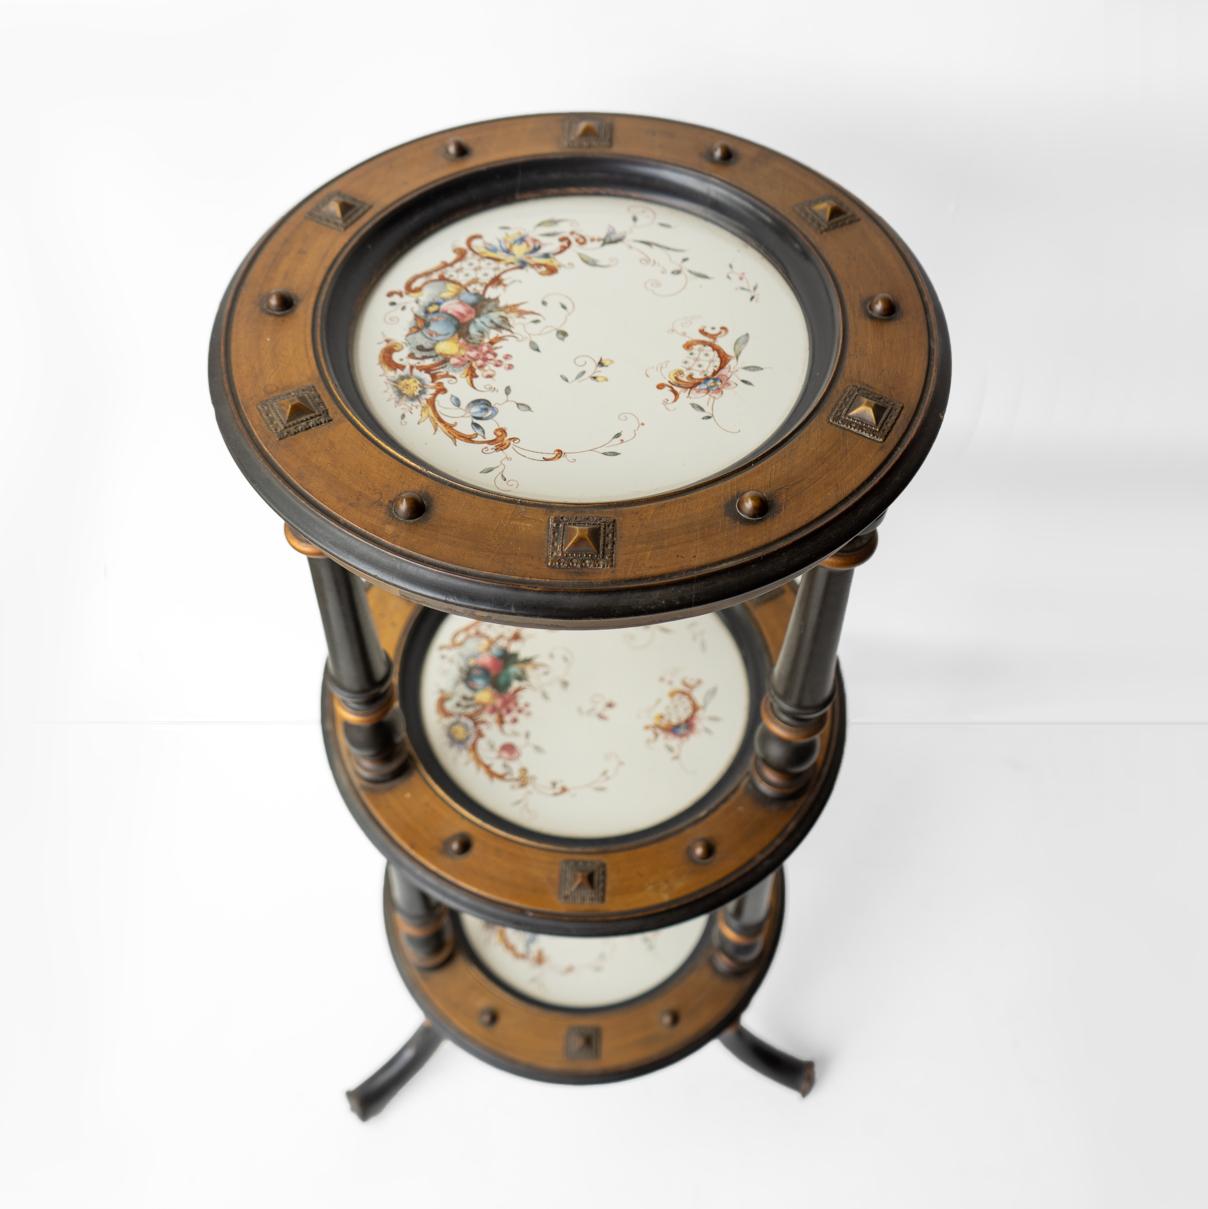 Aesthetic Movement Three Tiered Cake Stand, 19th Century Victorian cake display In Good Condition For Sale In Bristol, GB